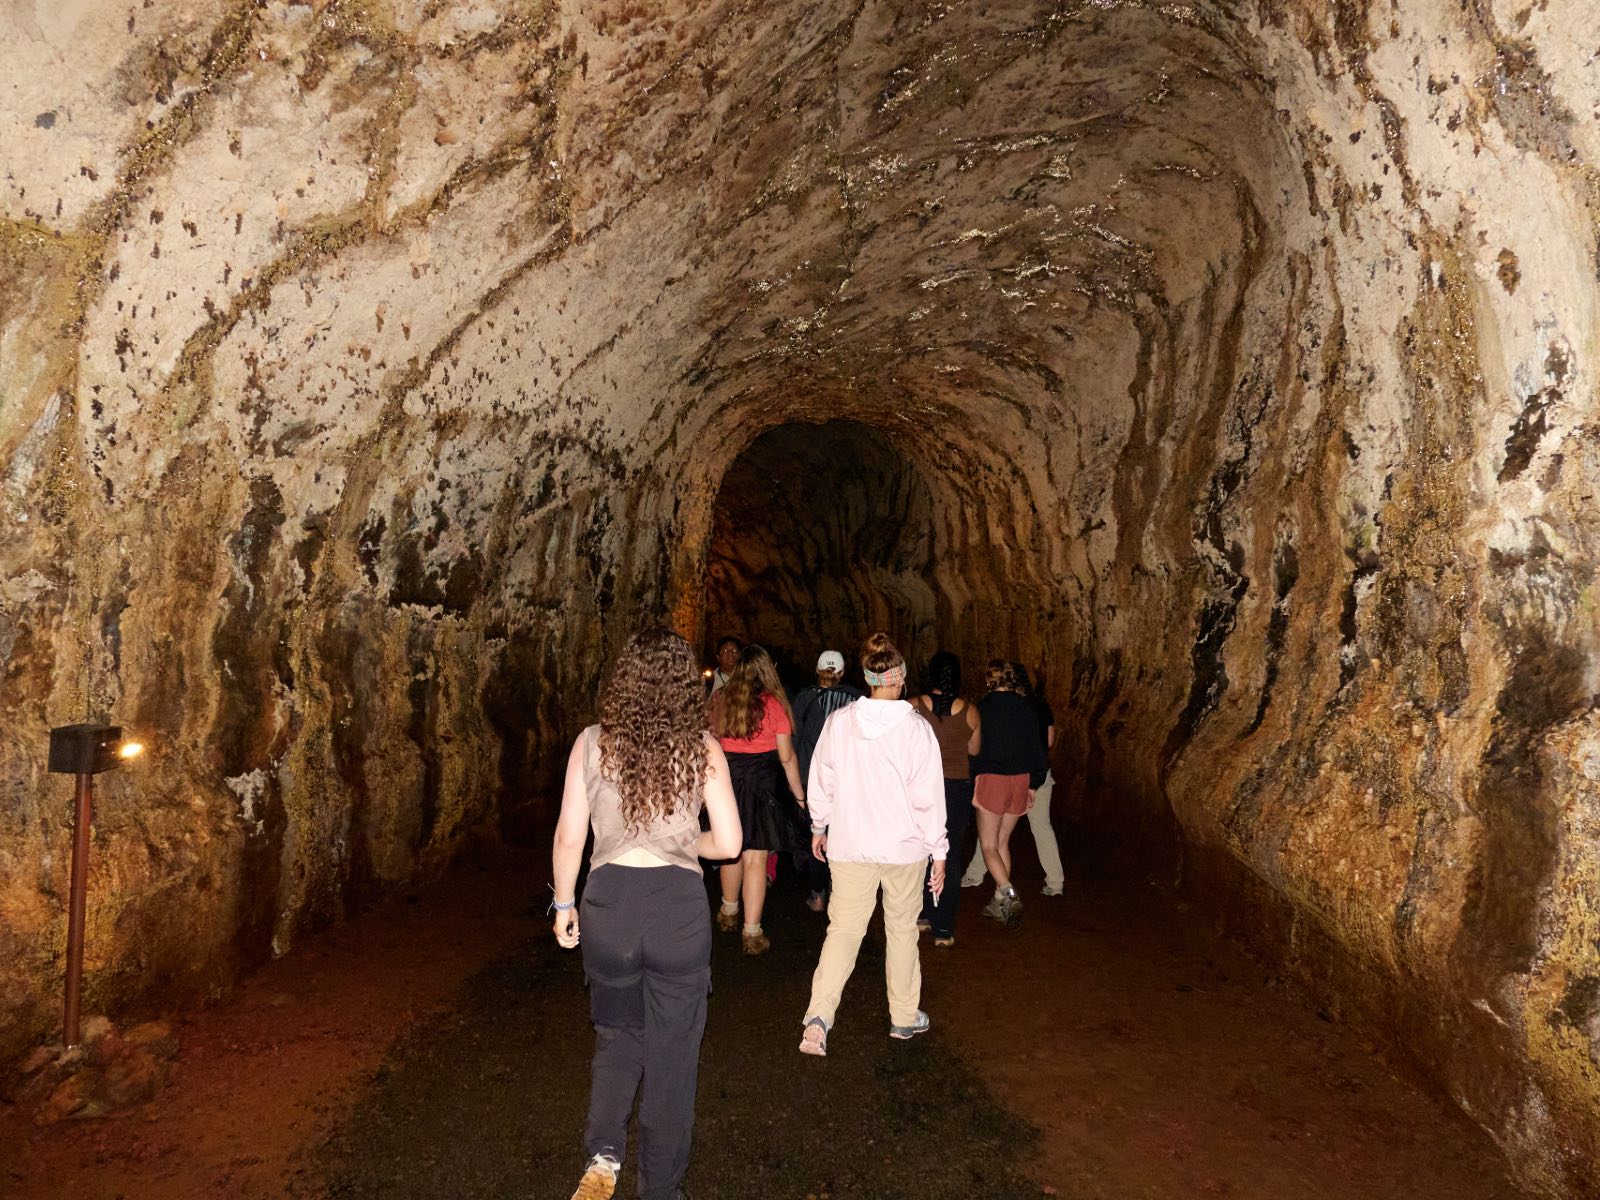 Students walking in a cave.